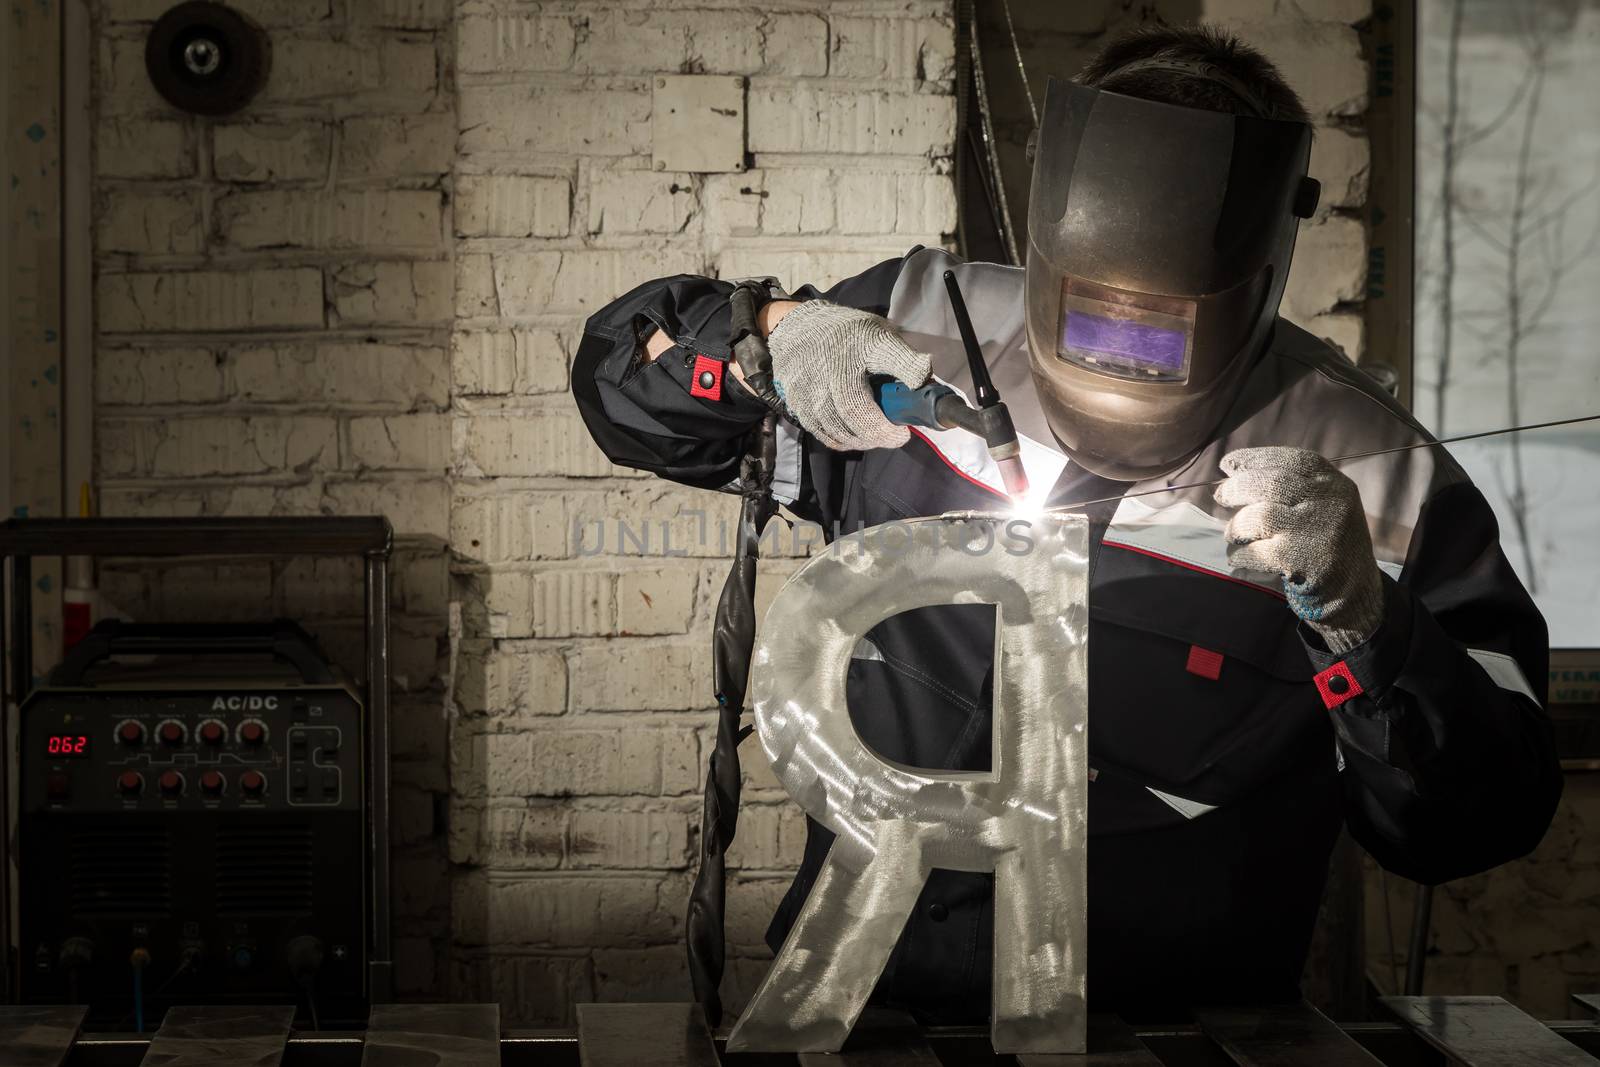 Welder welding a metal part in an industrial environment, wearing standard protection equipment. Sparks flying, fumes, industrial background